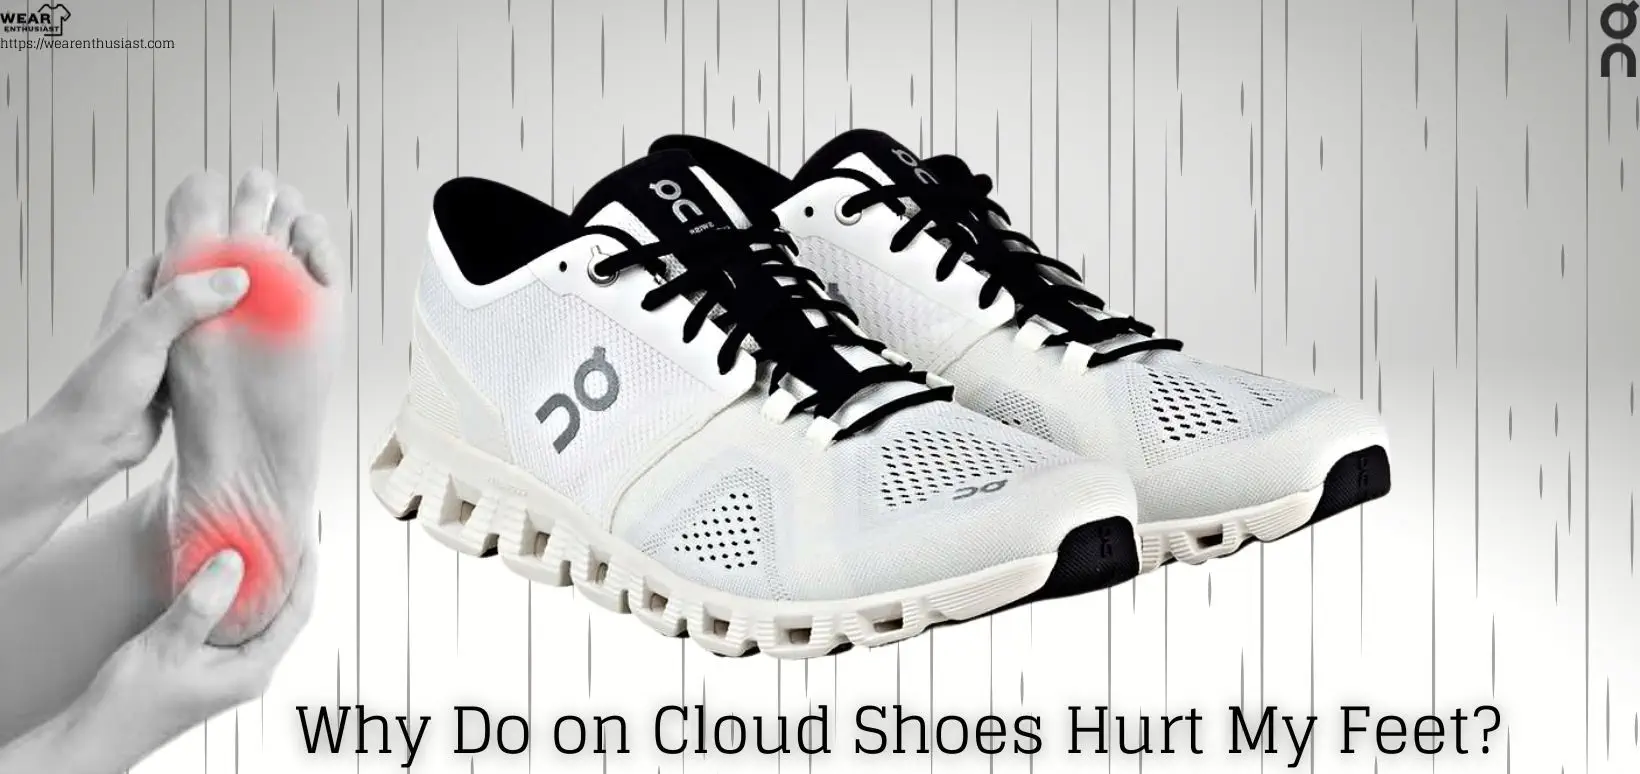 Why Do on Cloud Shoes Hurt My Feet?